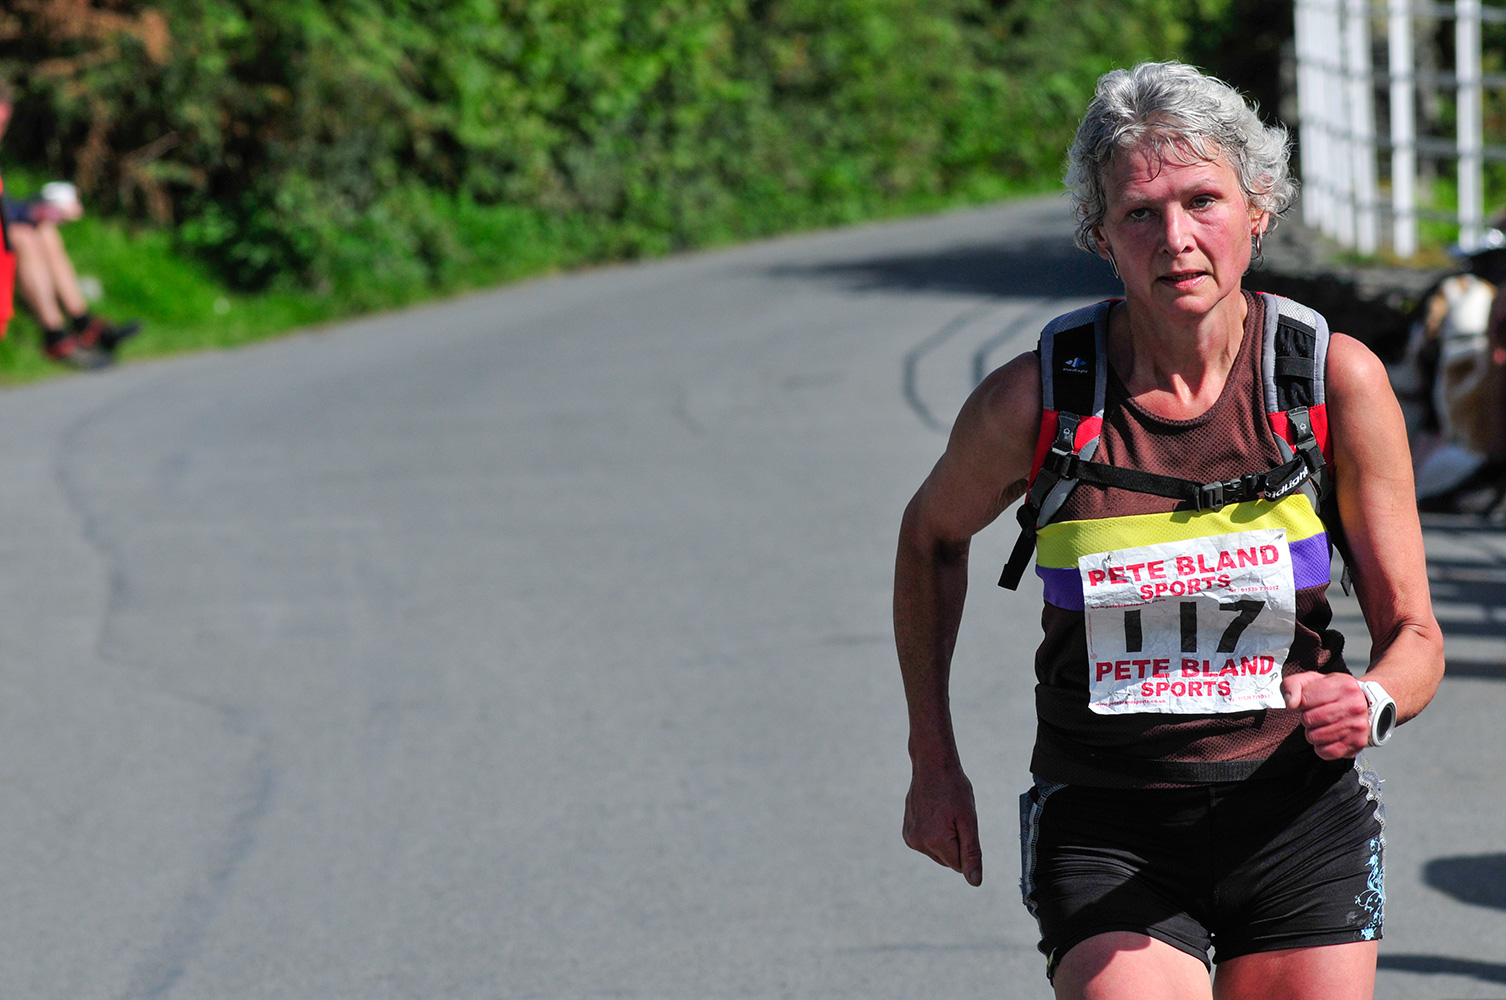 Competing in the Three Shires Fell Race in Cumbria in September 2015. Nicky is a British long distance runner, specialising in fell running. She holds the women's records for each of the three major fell running challenges in the United Kingdom – the Bob Graham Round, the Ramsay Round and the Paddy Buckley Round, as well as being the only person to have run each of them in under twenty hours.